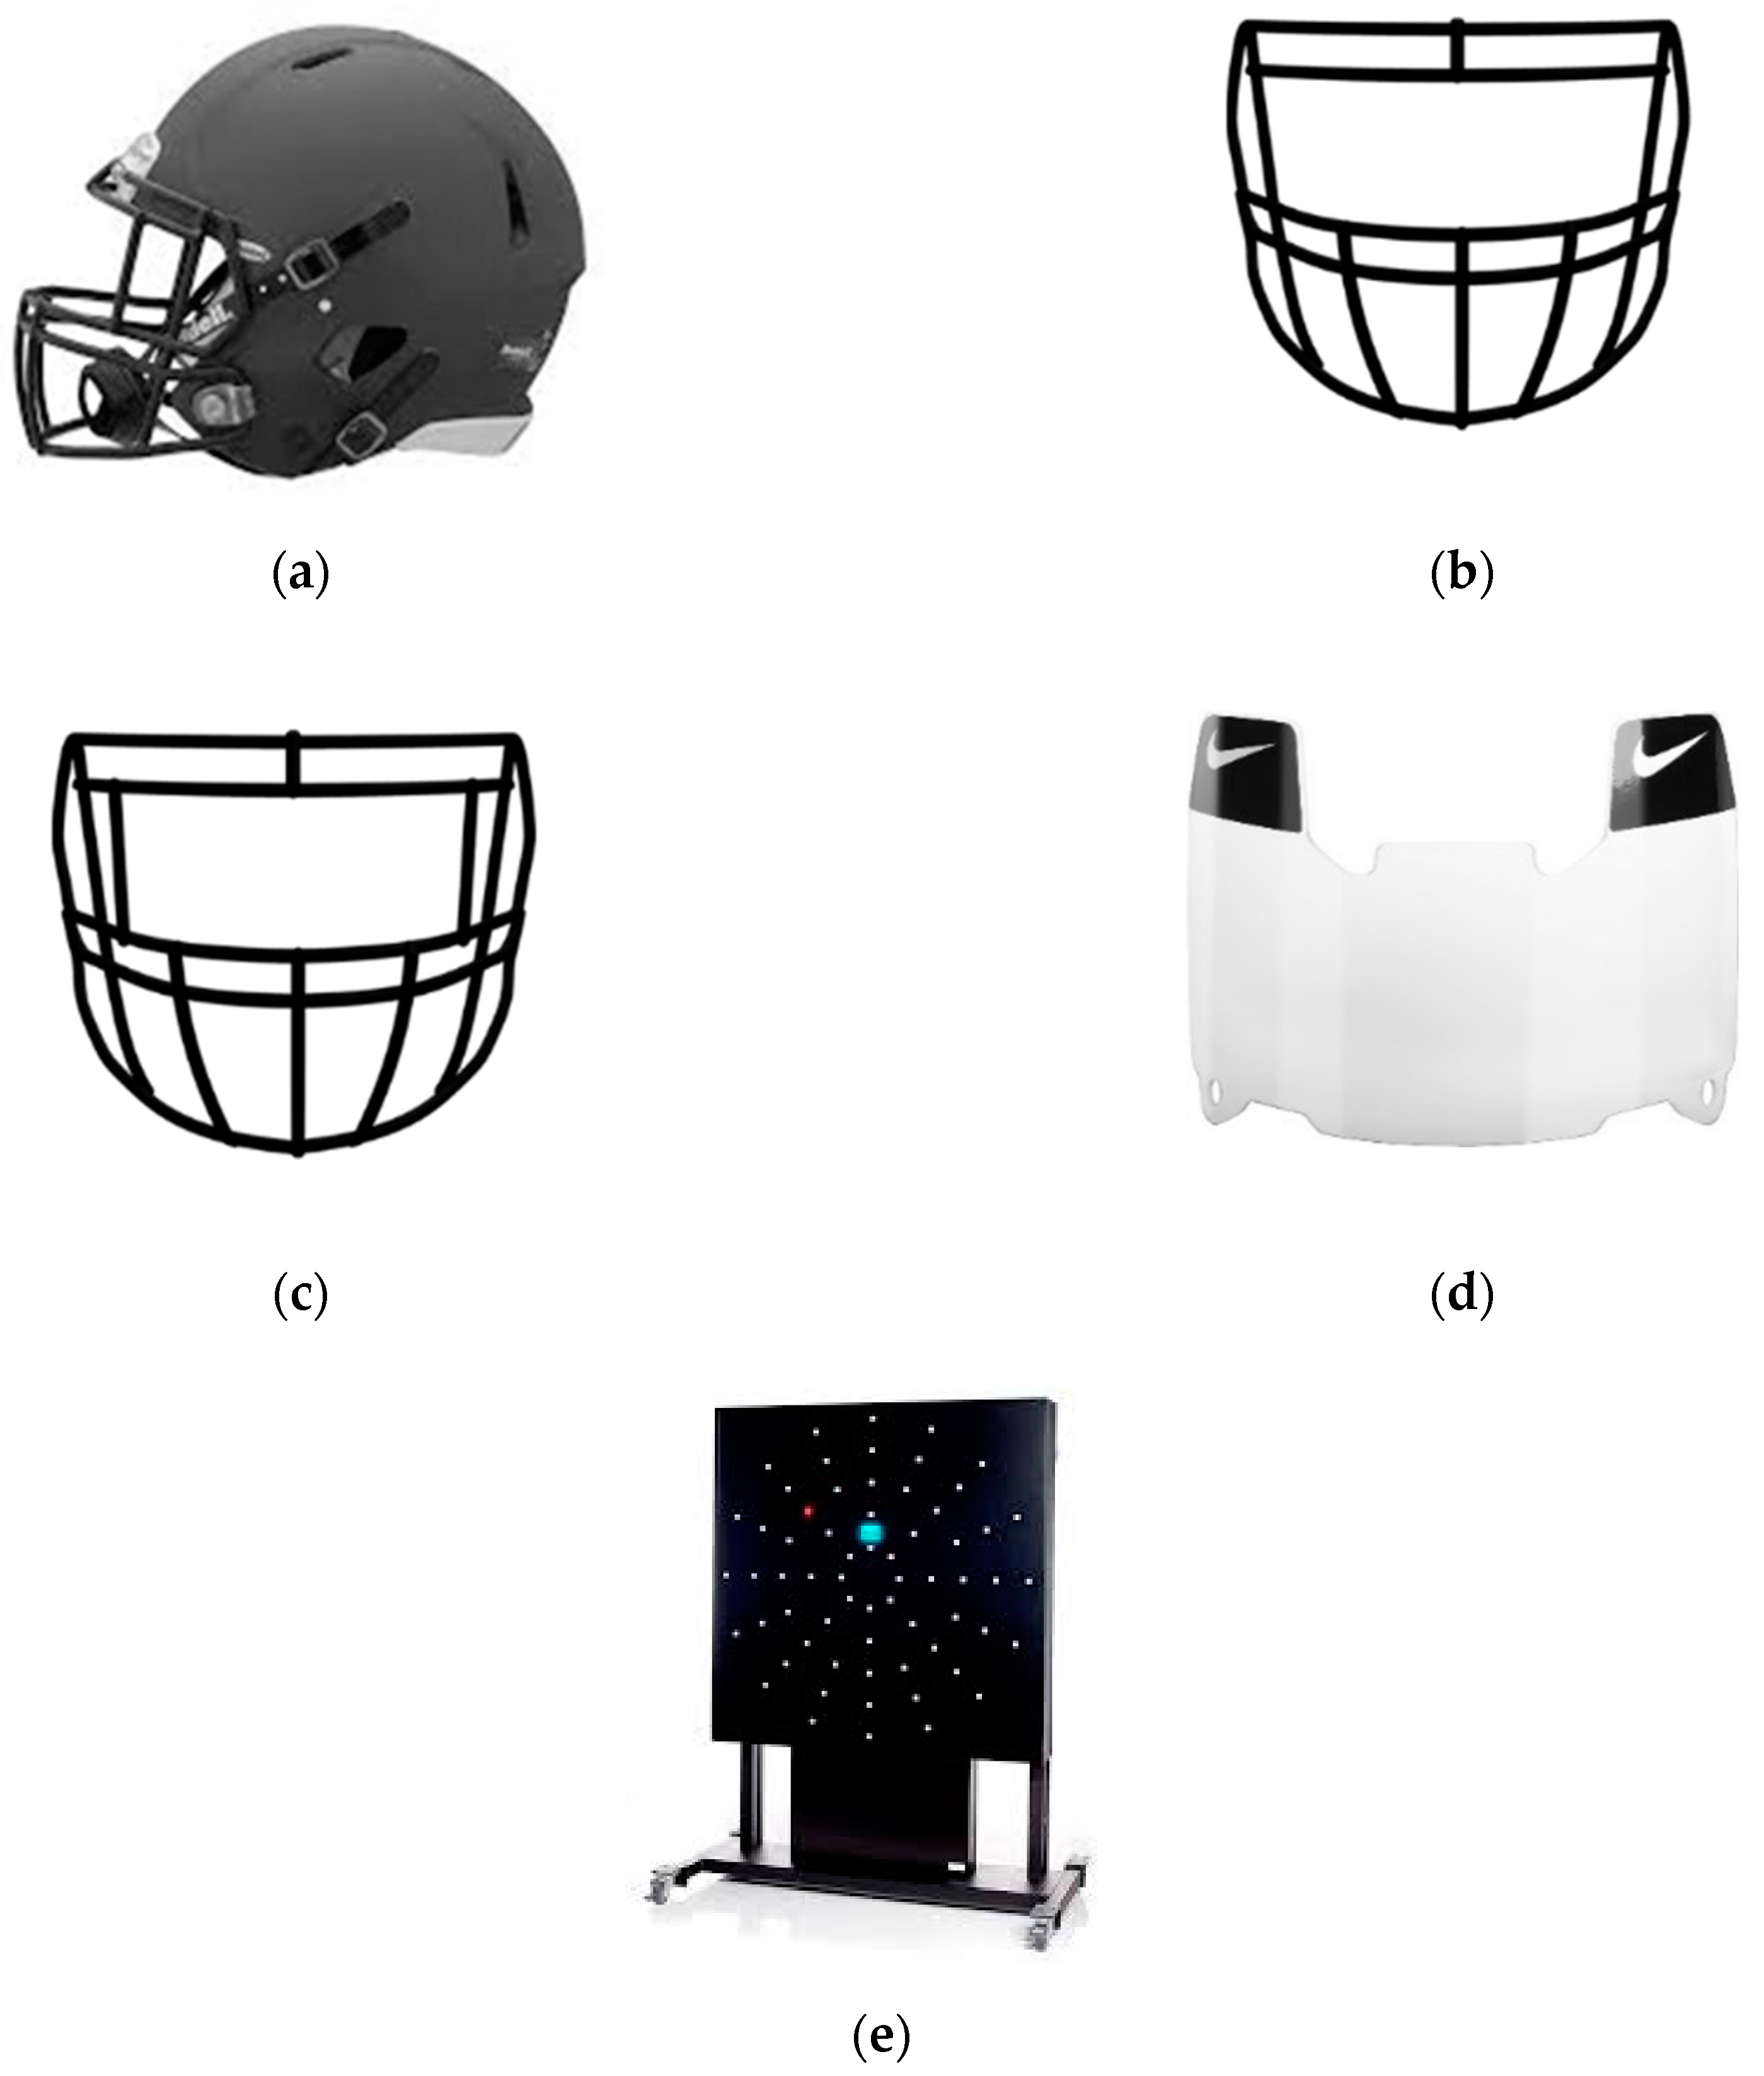 Sports | Free Full-Text | Effects of Protective American Football Headgear  on Peripheral Vision Reaction Time and Visual Target Detection in Division  I NCAA Football Players